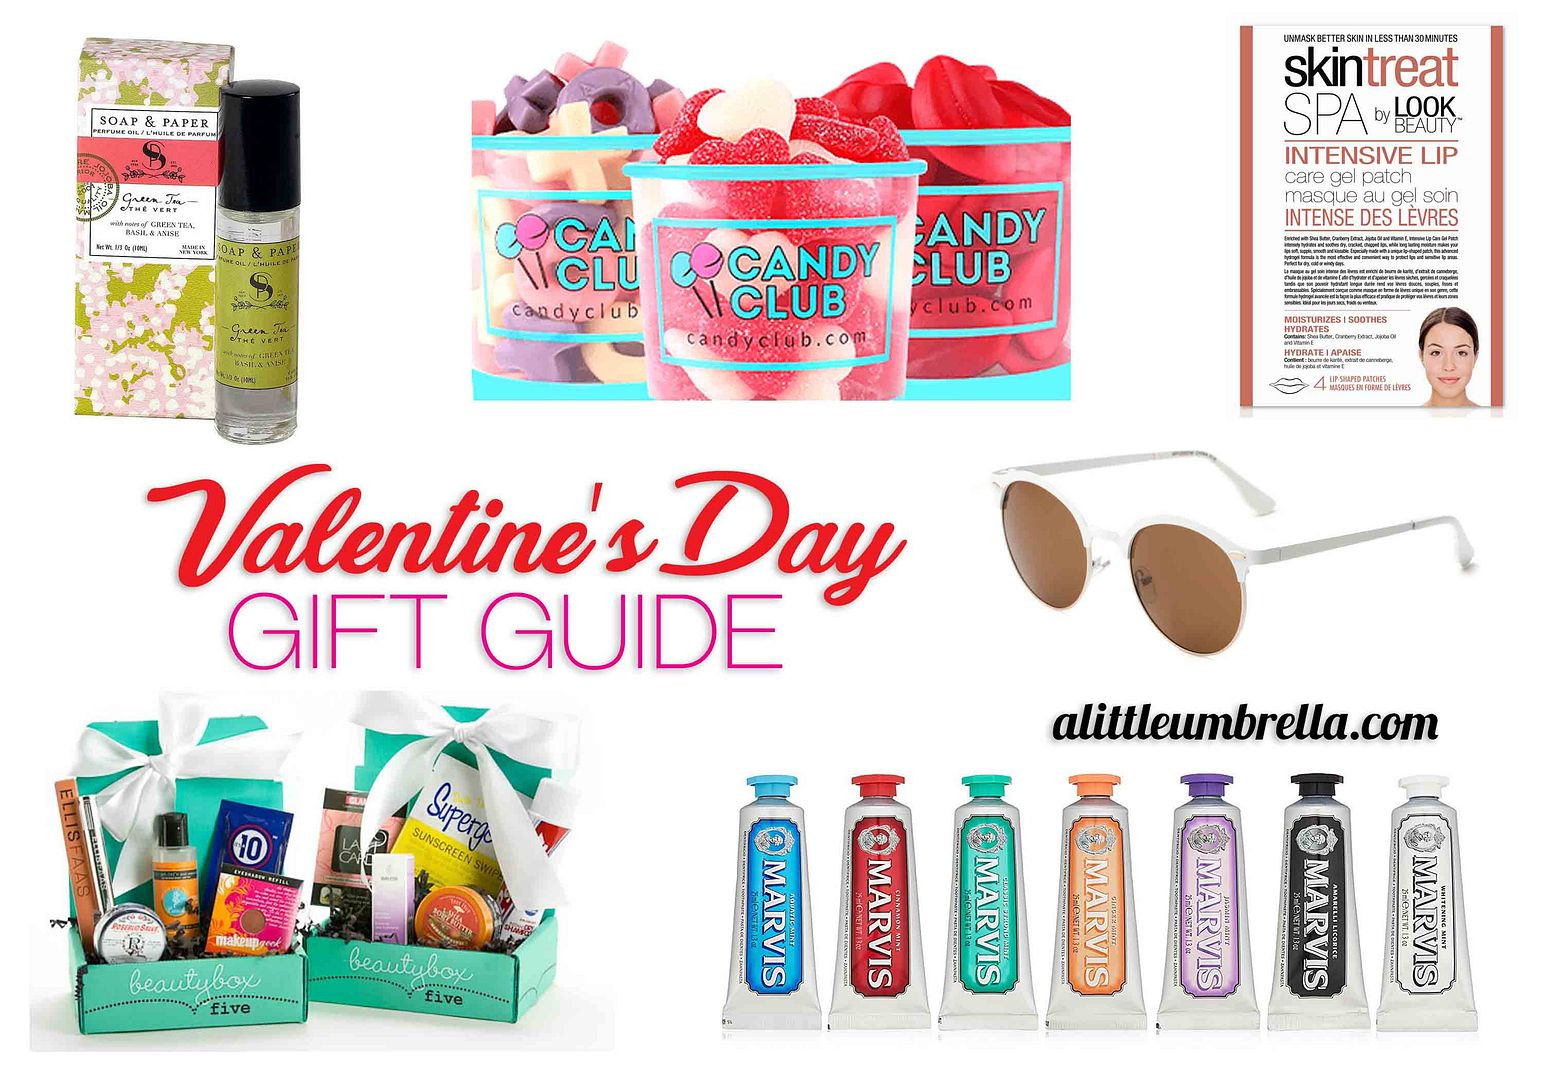 Valentines Day Gift Guide
 Put A Little Umbrella In Your Drink Valentine s Day Gift